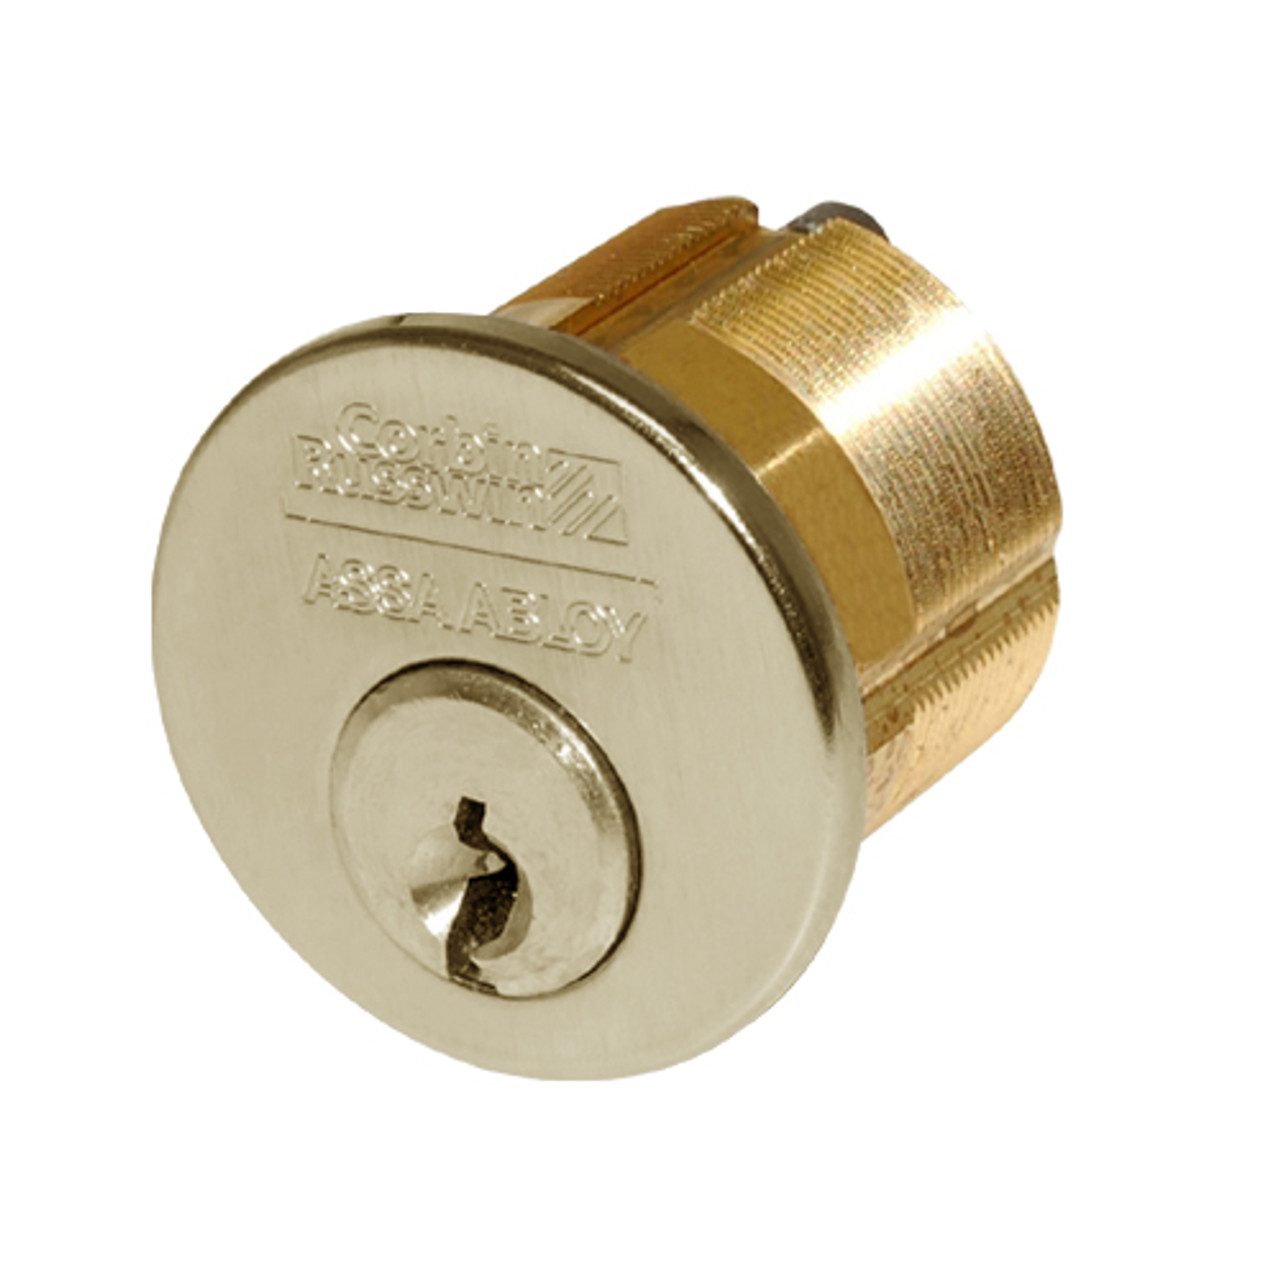 CR1000-118-A02-6-59C1-606 Corbin Conventional Mortise Cylinder for Mortise Lock and DL3000 Deadlocks with Straight Cam in Satin Brass Finish